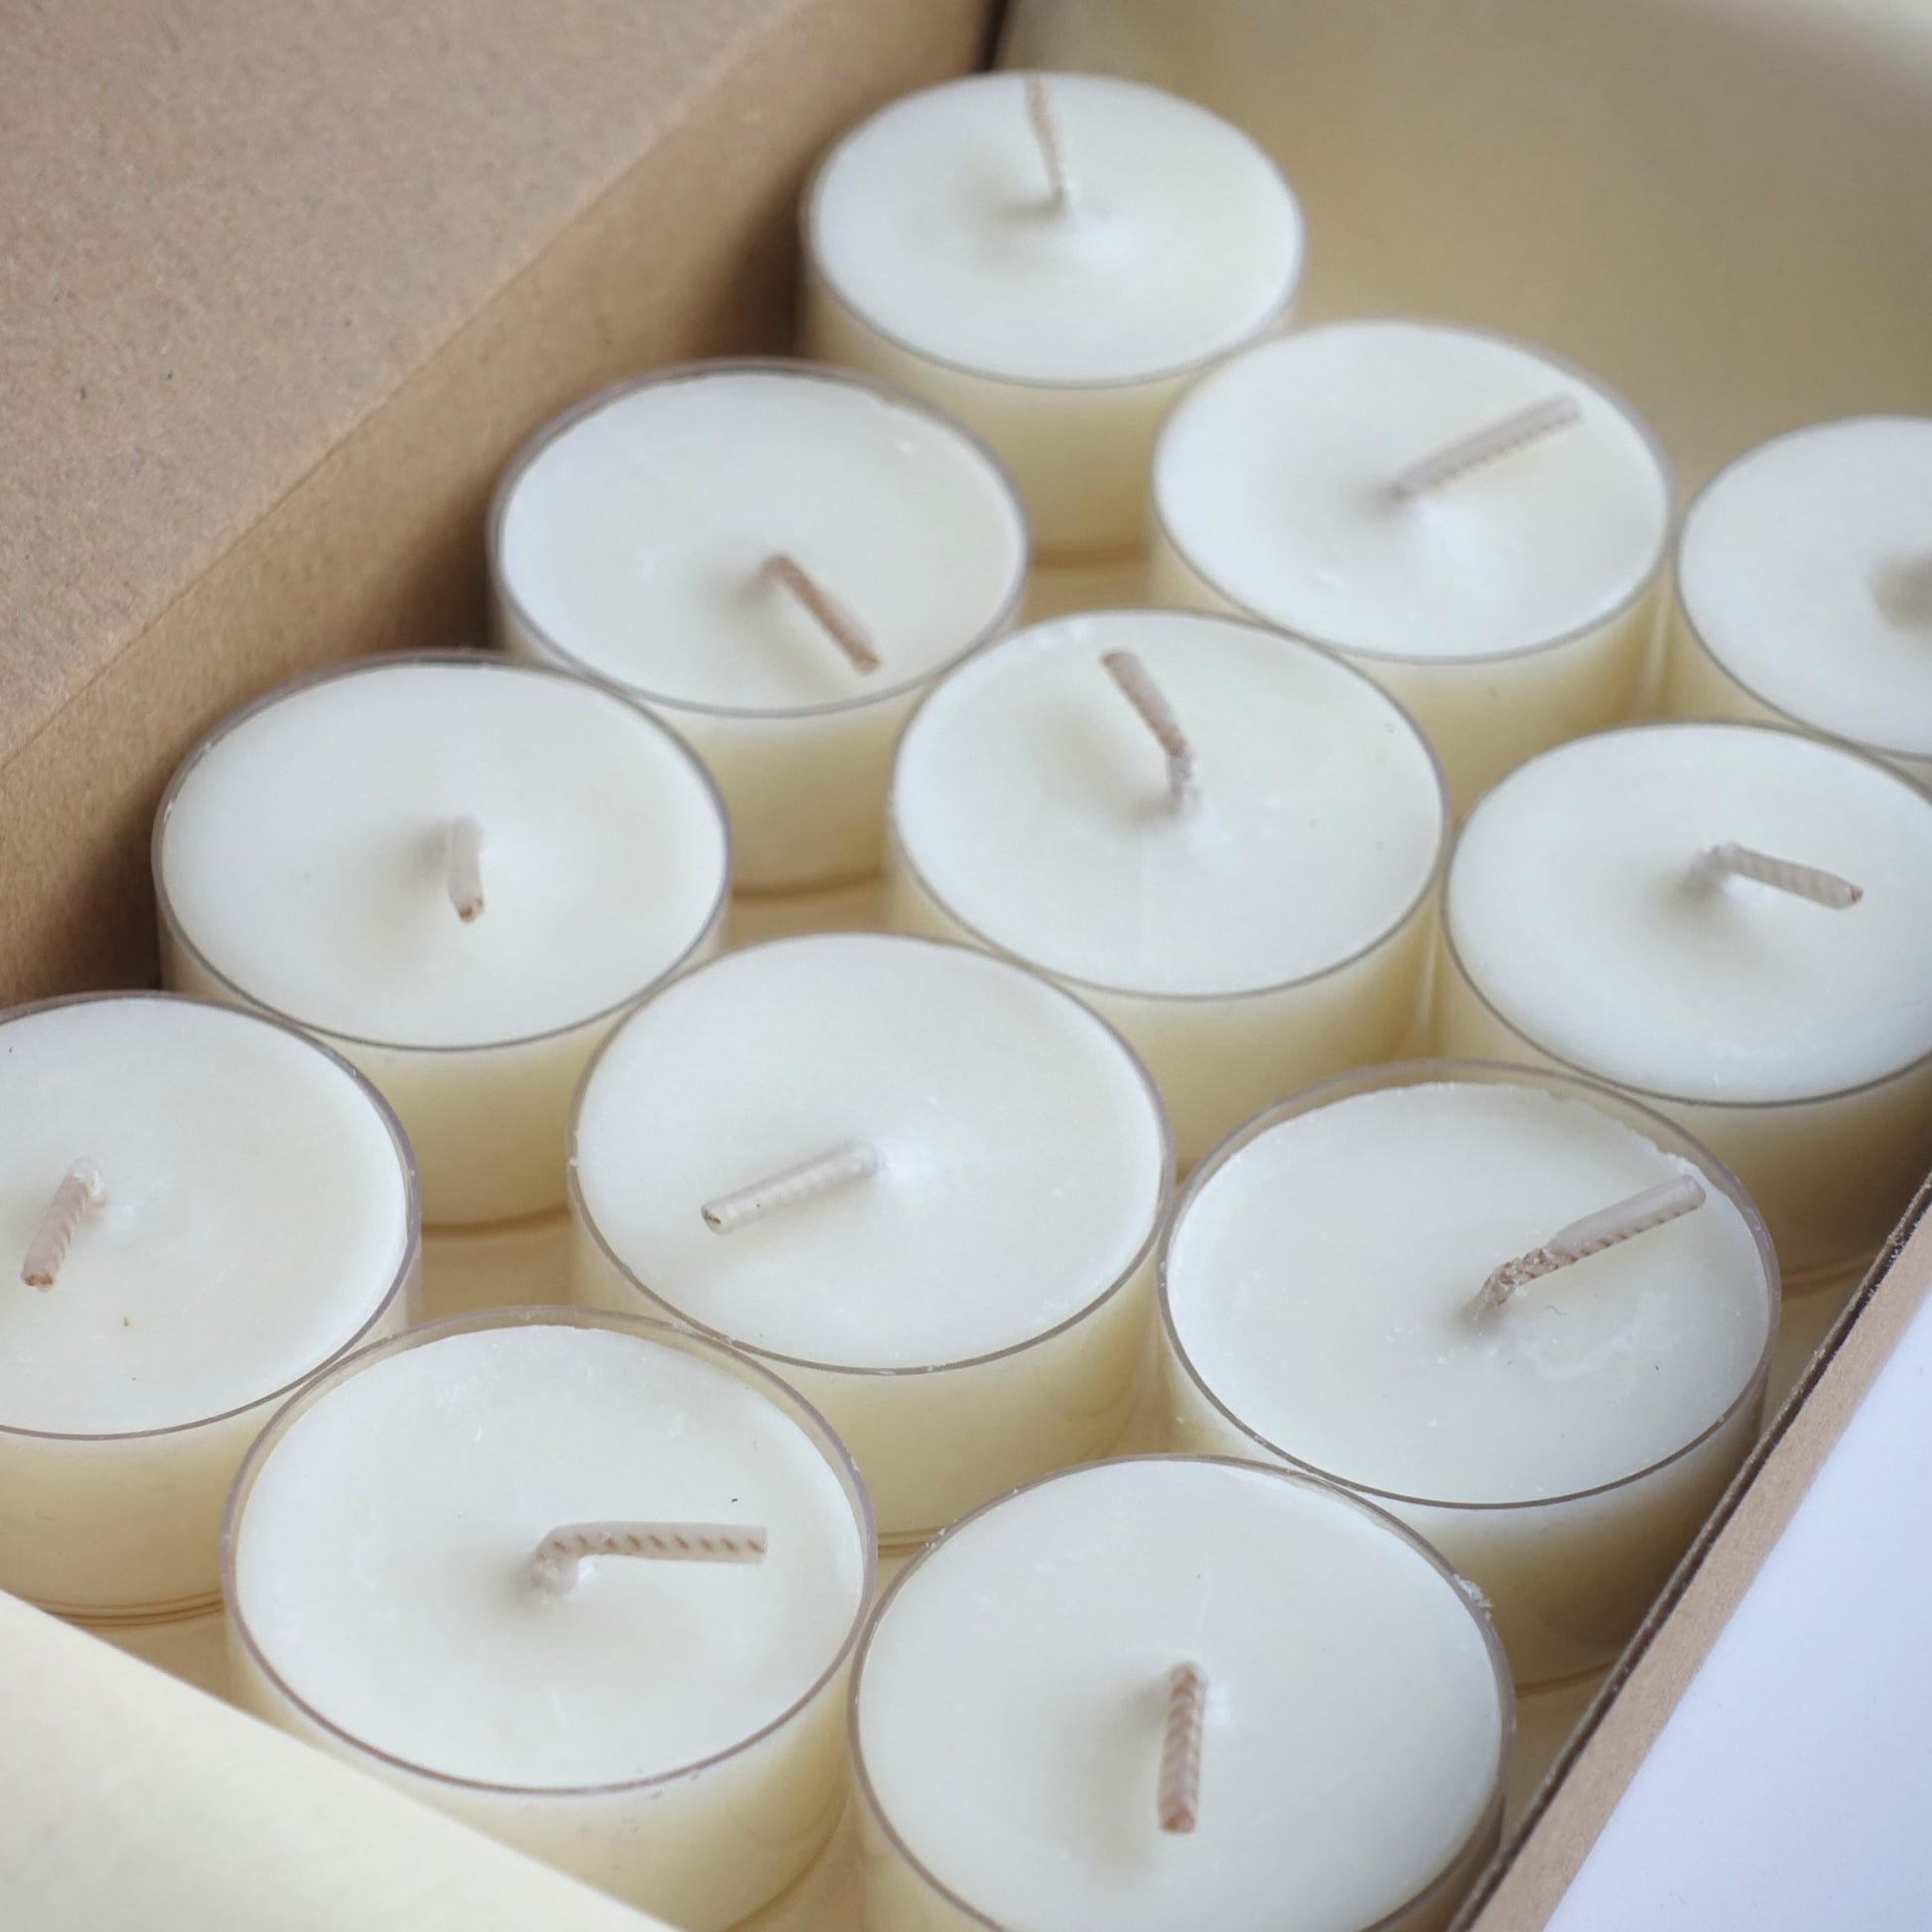 12 Shō-moon Natural and refillable unscented Tealights Candle with clean burning and natural wax.